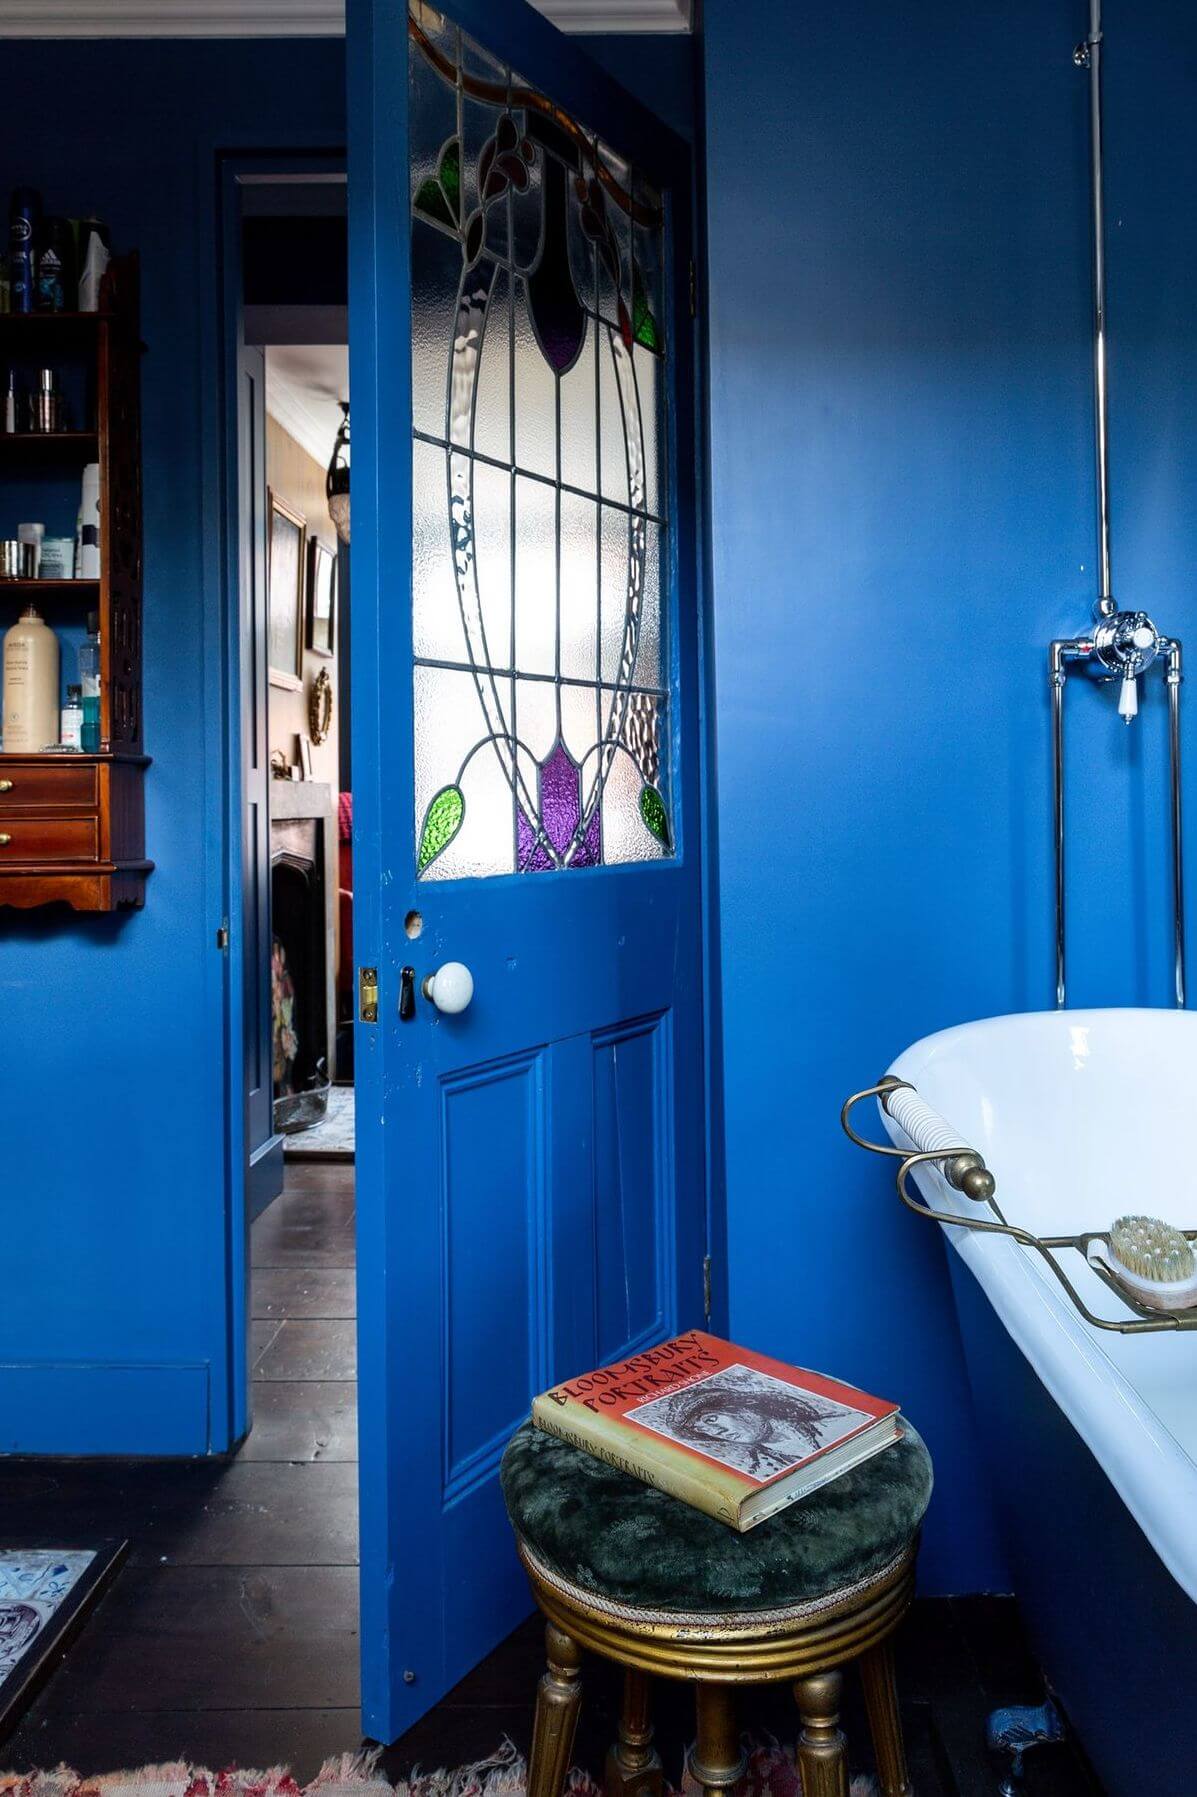 2- Dare to use electric blue on the bathroom door